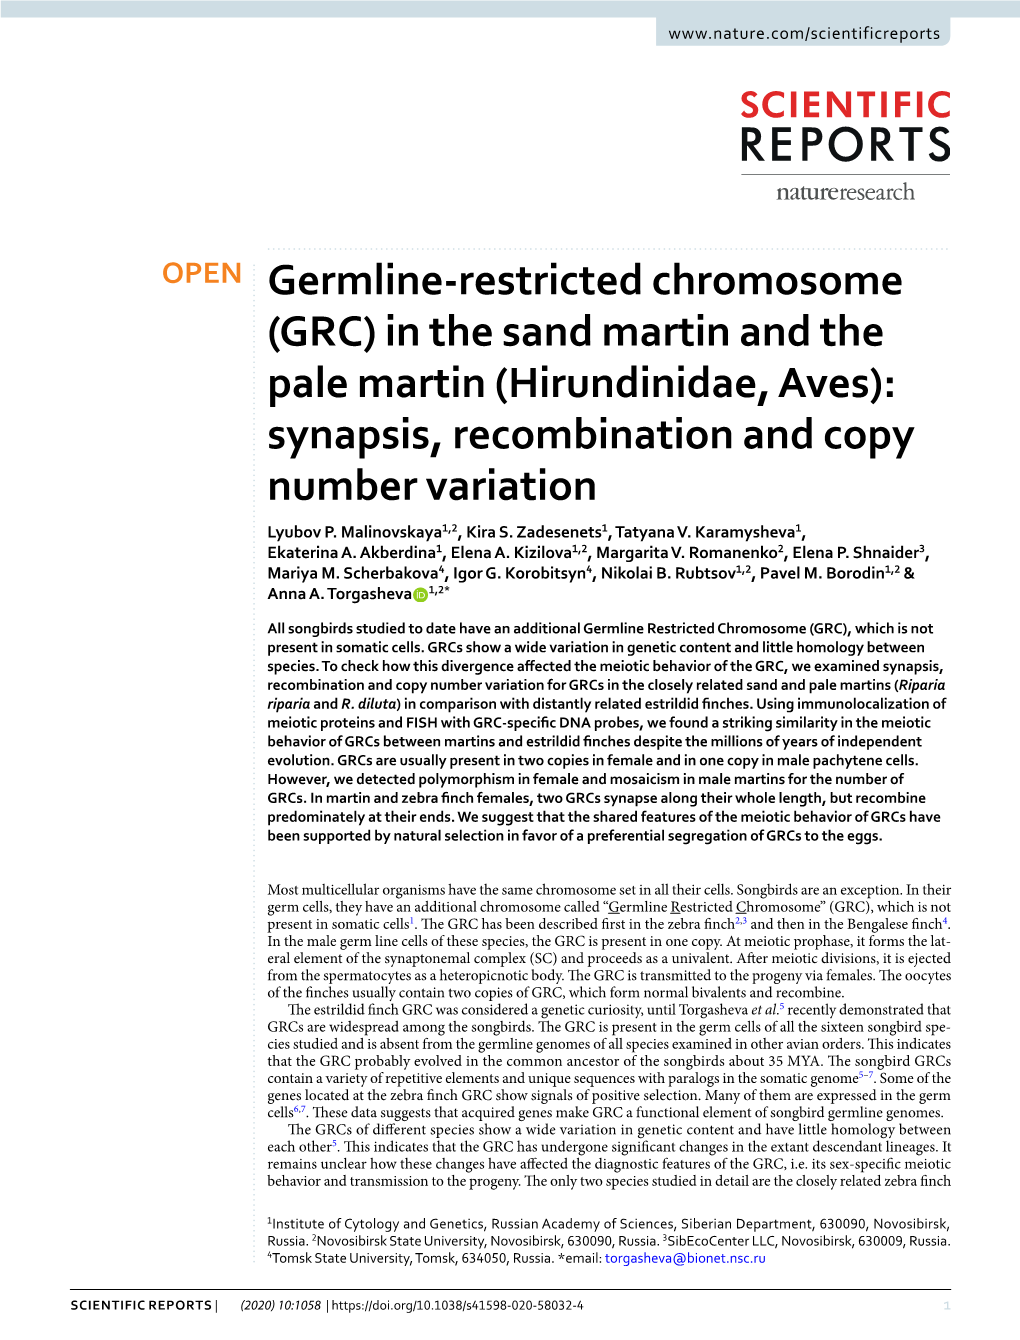 Germline-Restricted Chromosome (GRC) in the Sand Martin and the Pale Martin (Hirundinidae, Aves): Synapsis, Recombination and Copy Number Variation Lyubov P